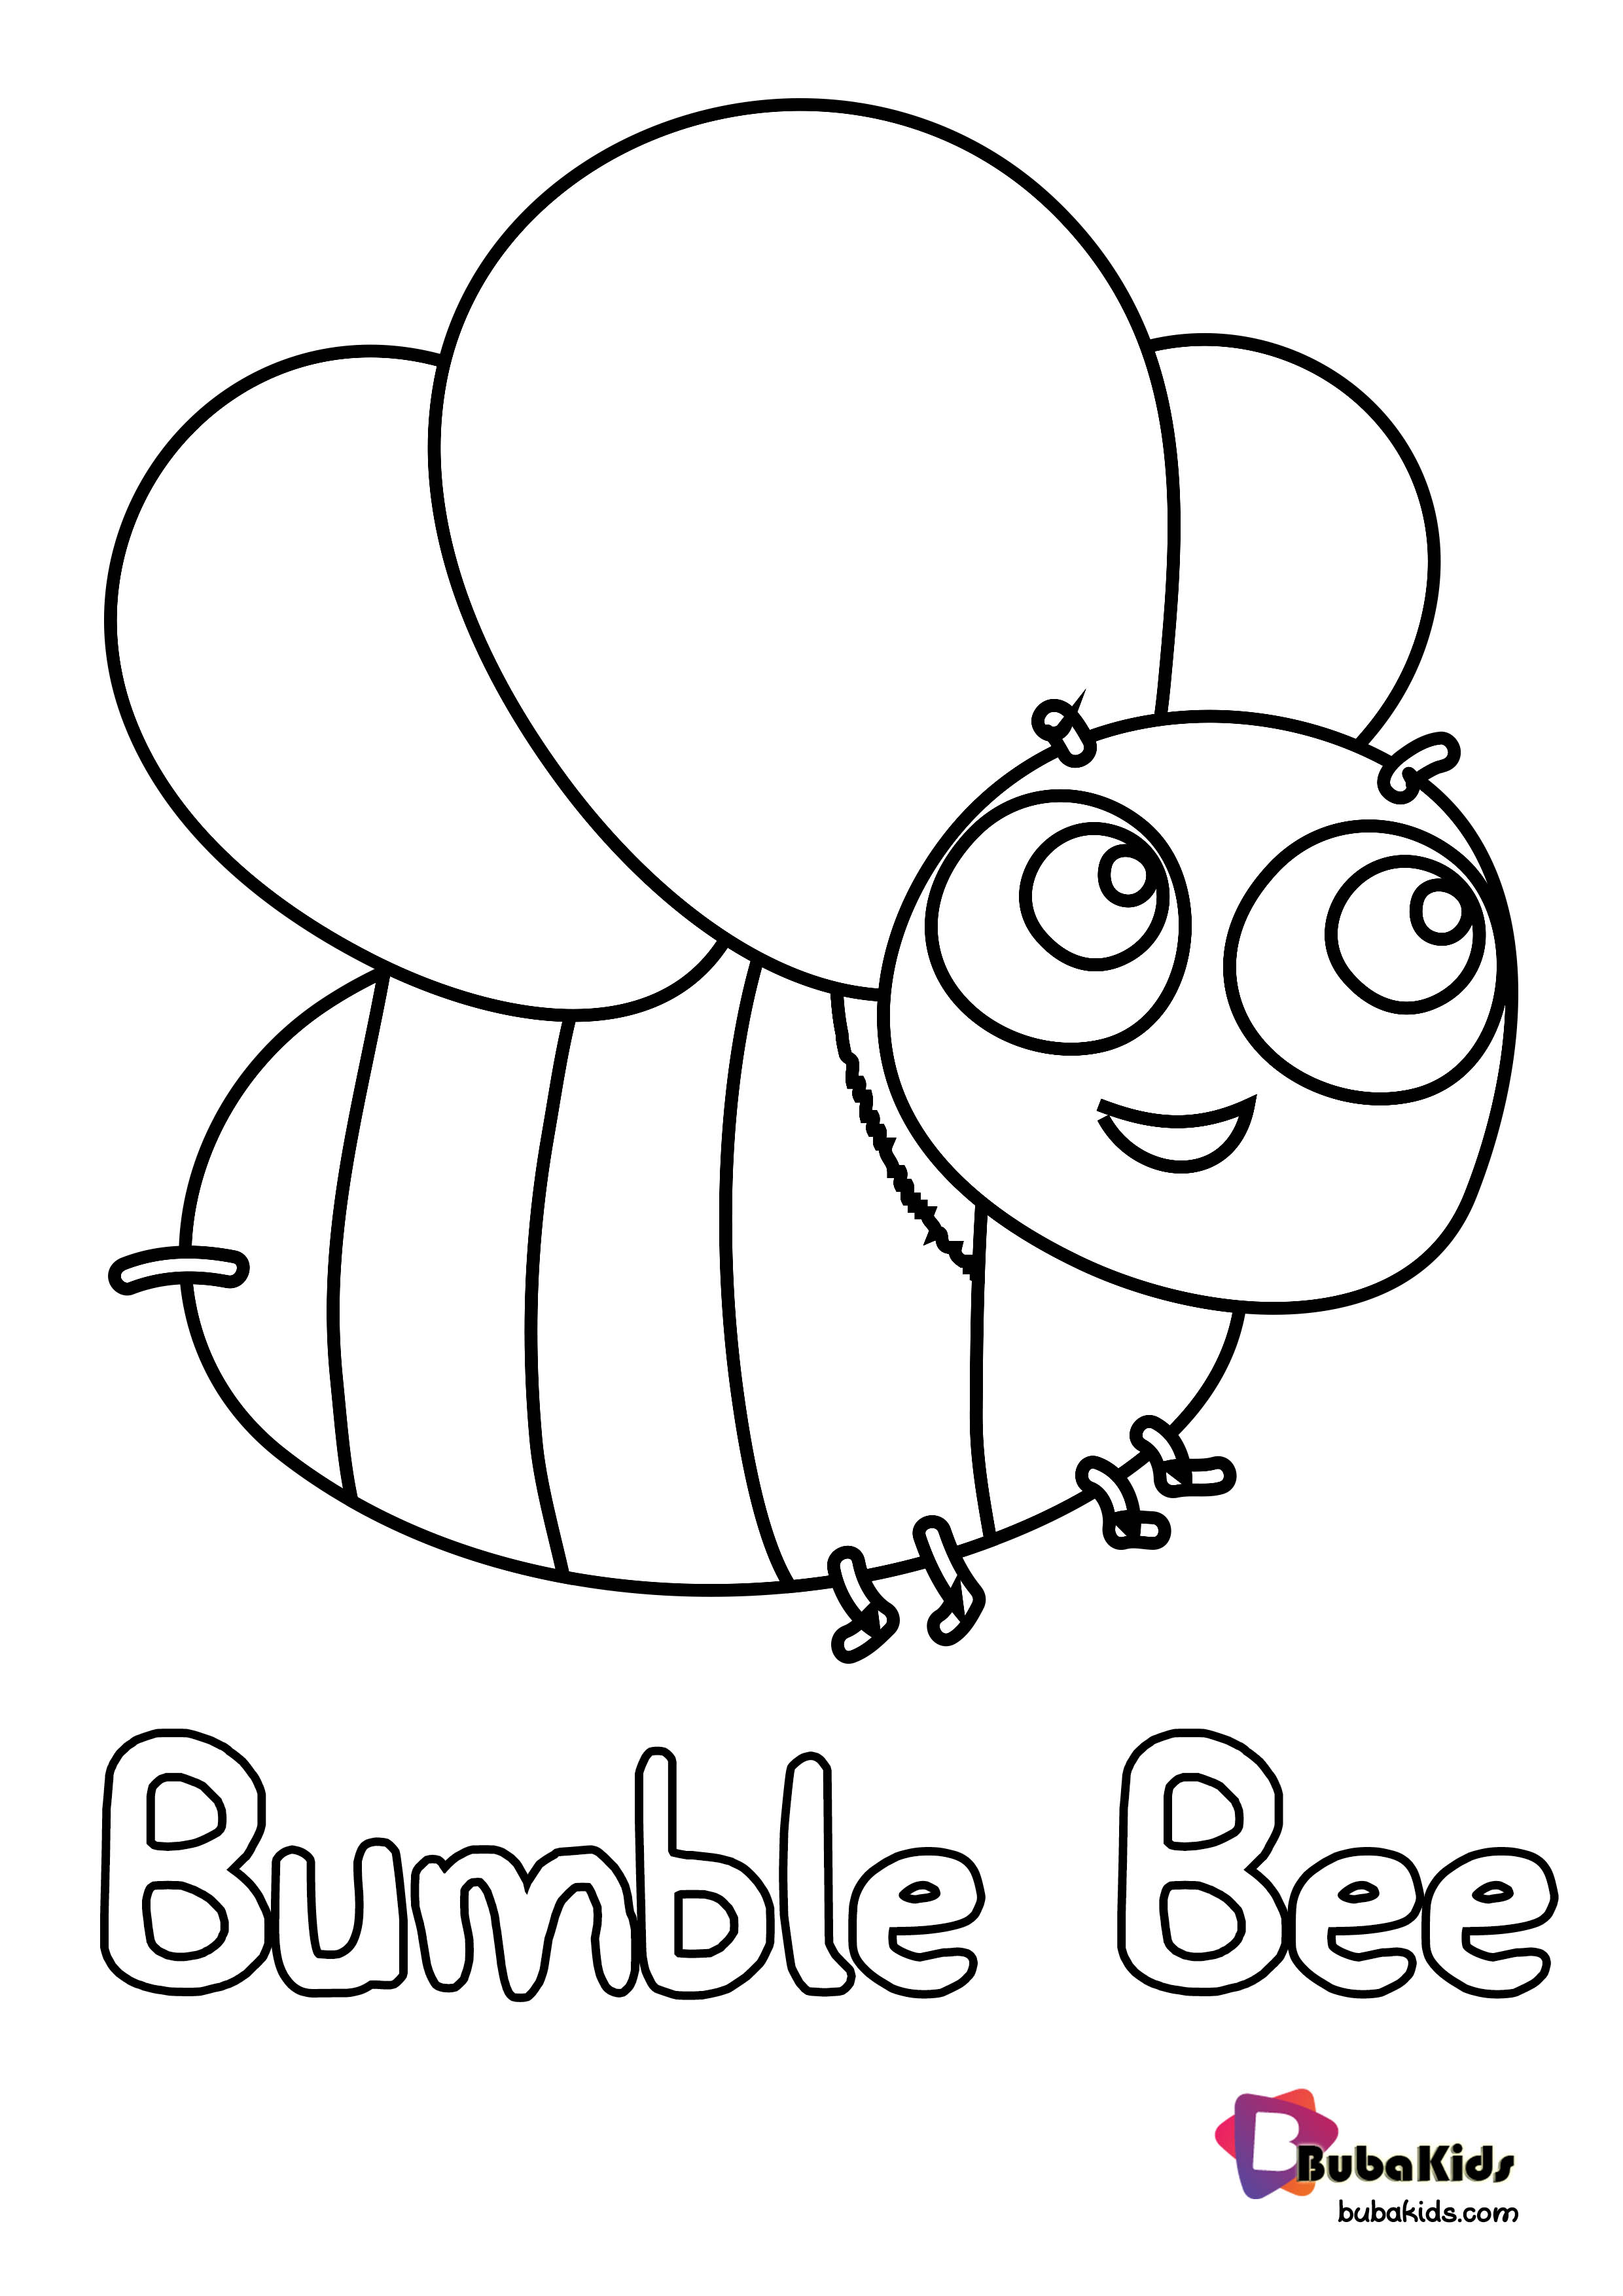 Bumble Bee Coloring Page Bubakids Wallpaper